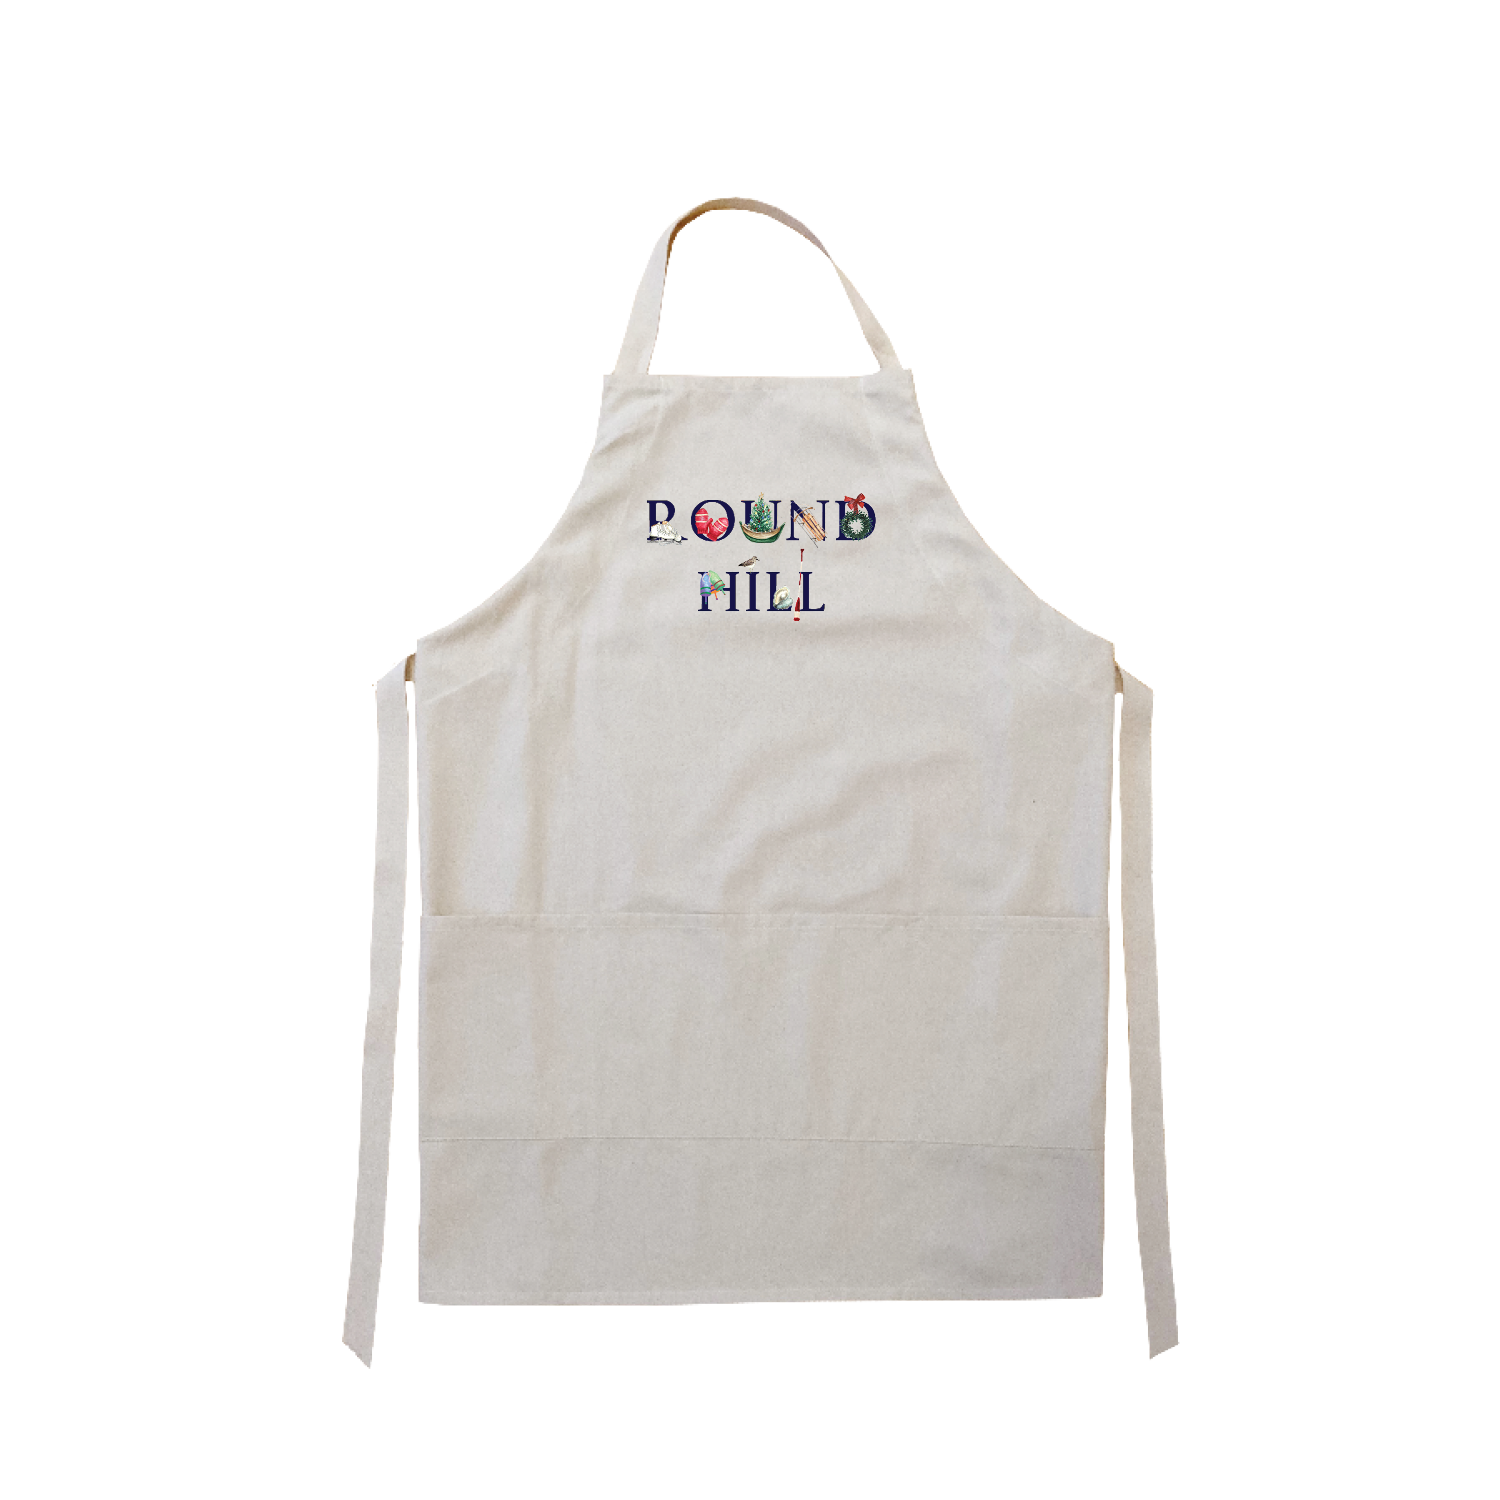 round hill winter holiday apron